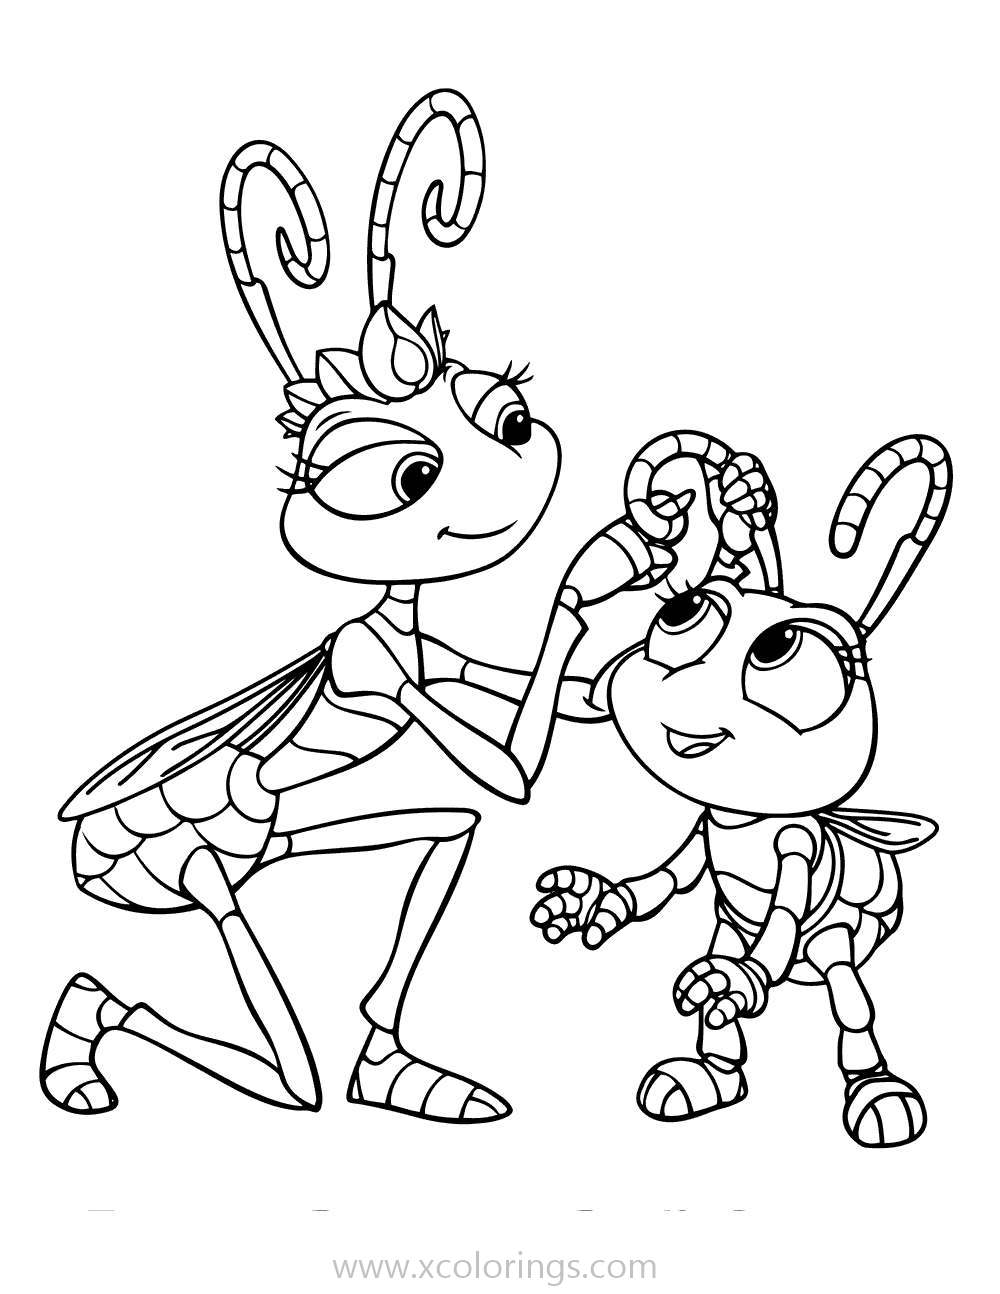 Free A Bugs Life Coloring Pages Princess Atta Helping Dot printable